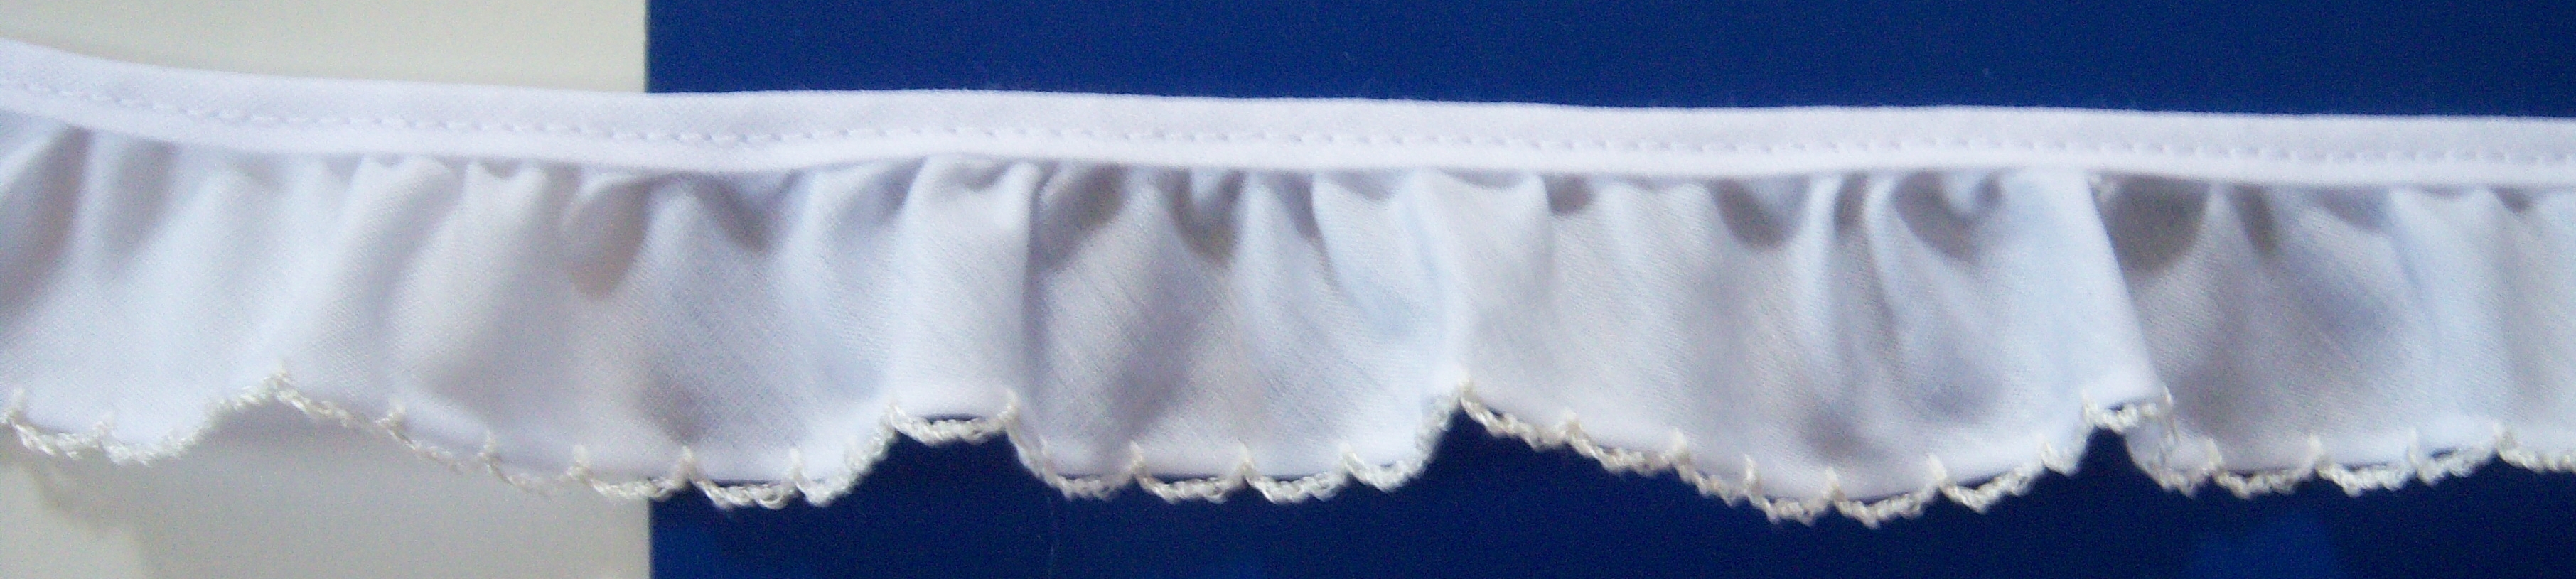 White 1" Poly/Cotton Ruffled Lace